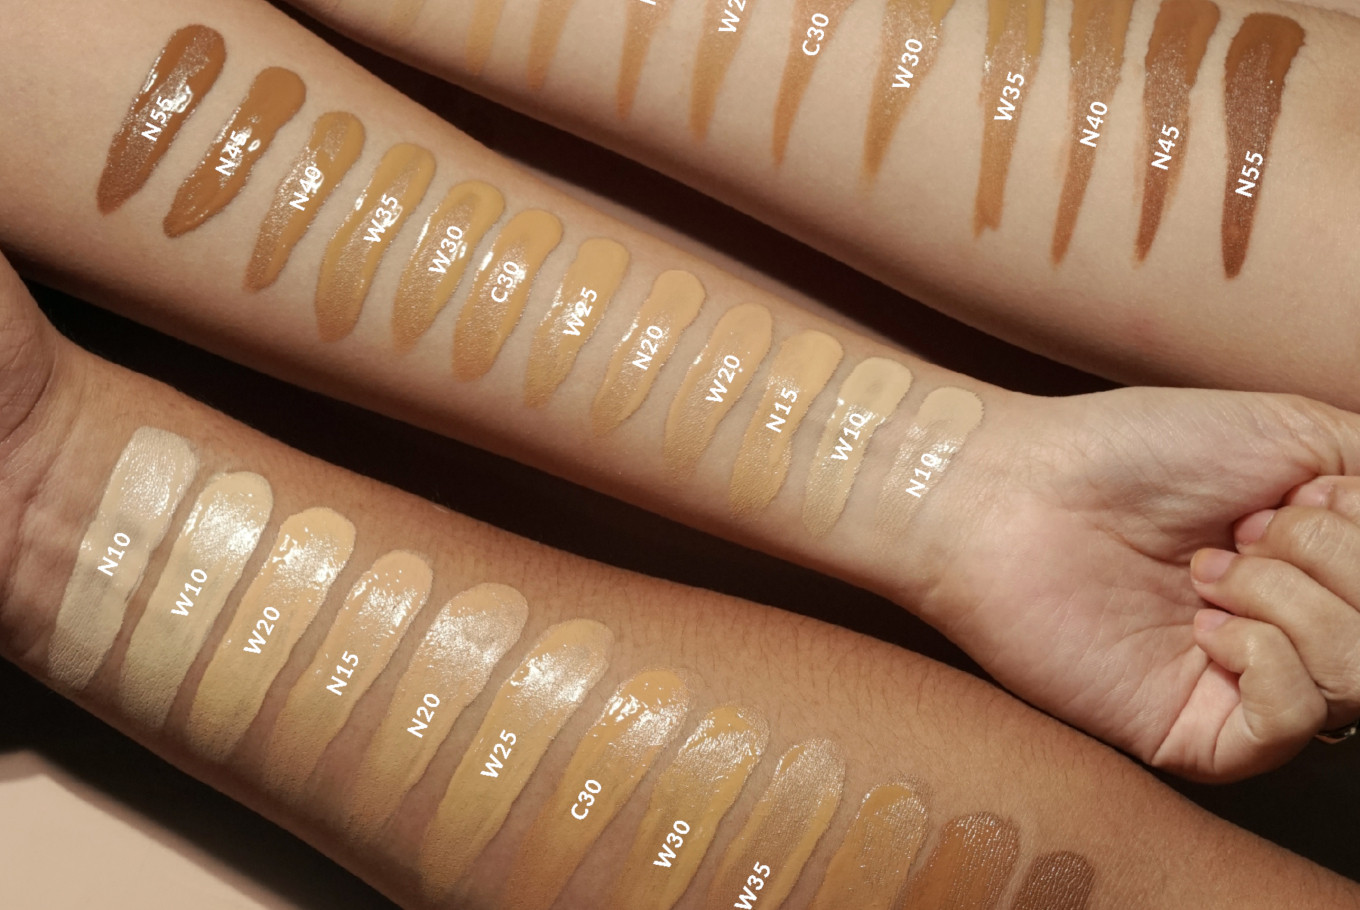 BLP Beauty to launch 7 new foundation shades